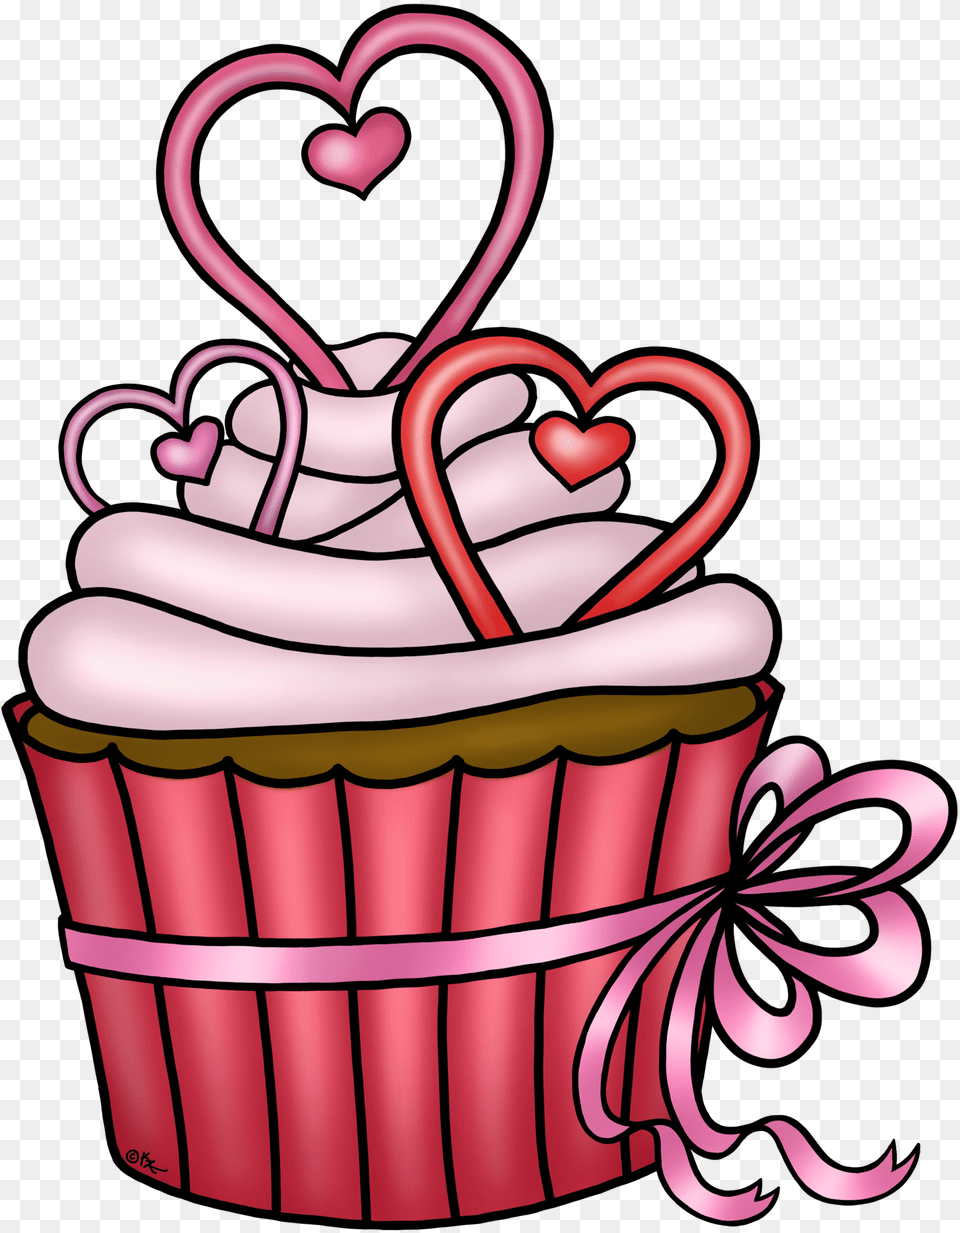 Library Of Heart Cake Clip Download Files Clipart Heart Birthday Cake Clipart, Cream, Cupcake, Dessert, Food Png